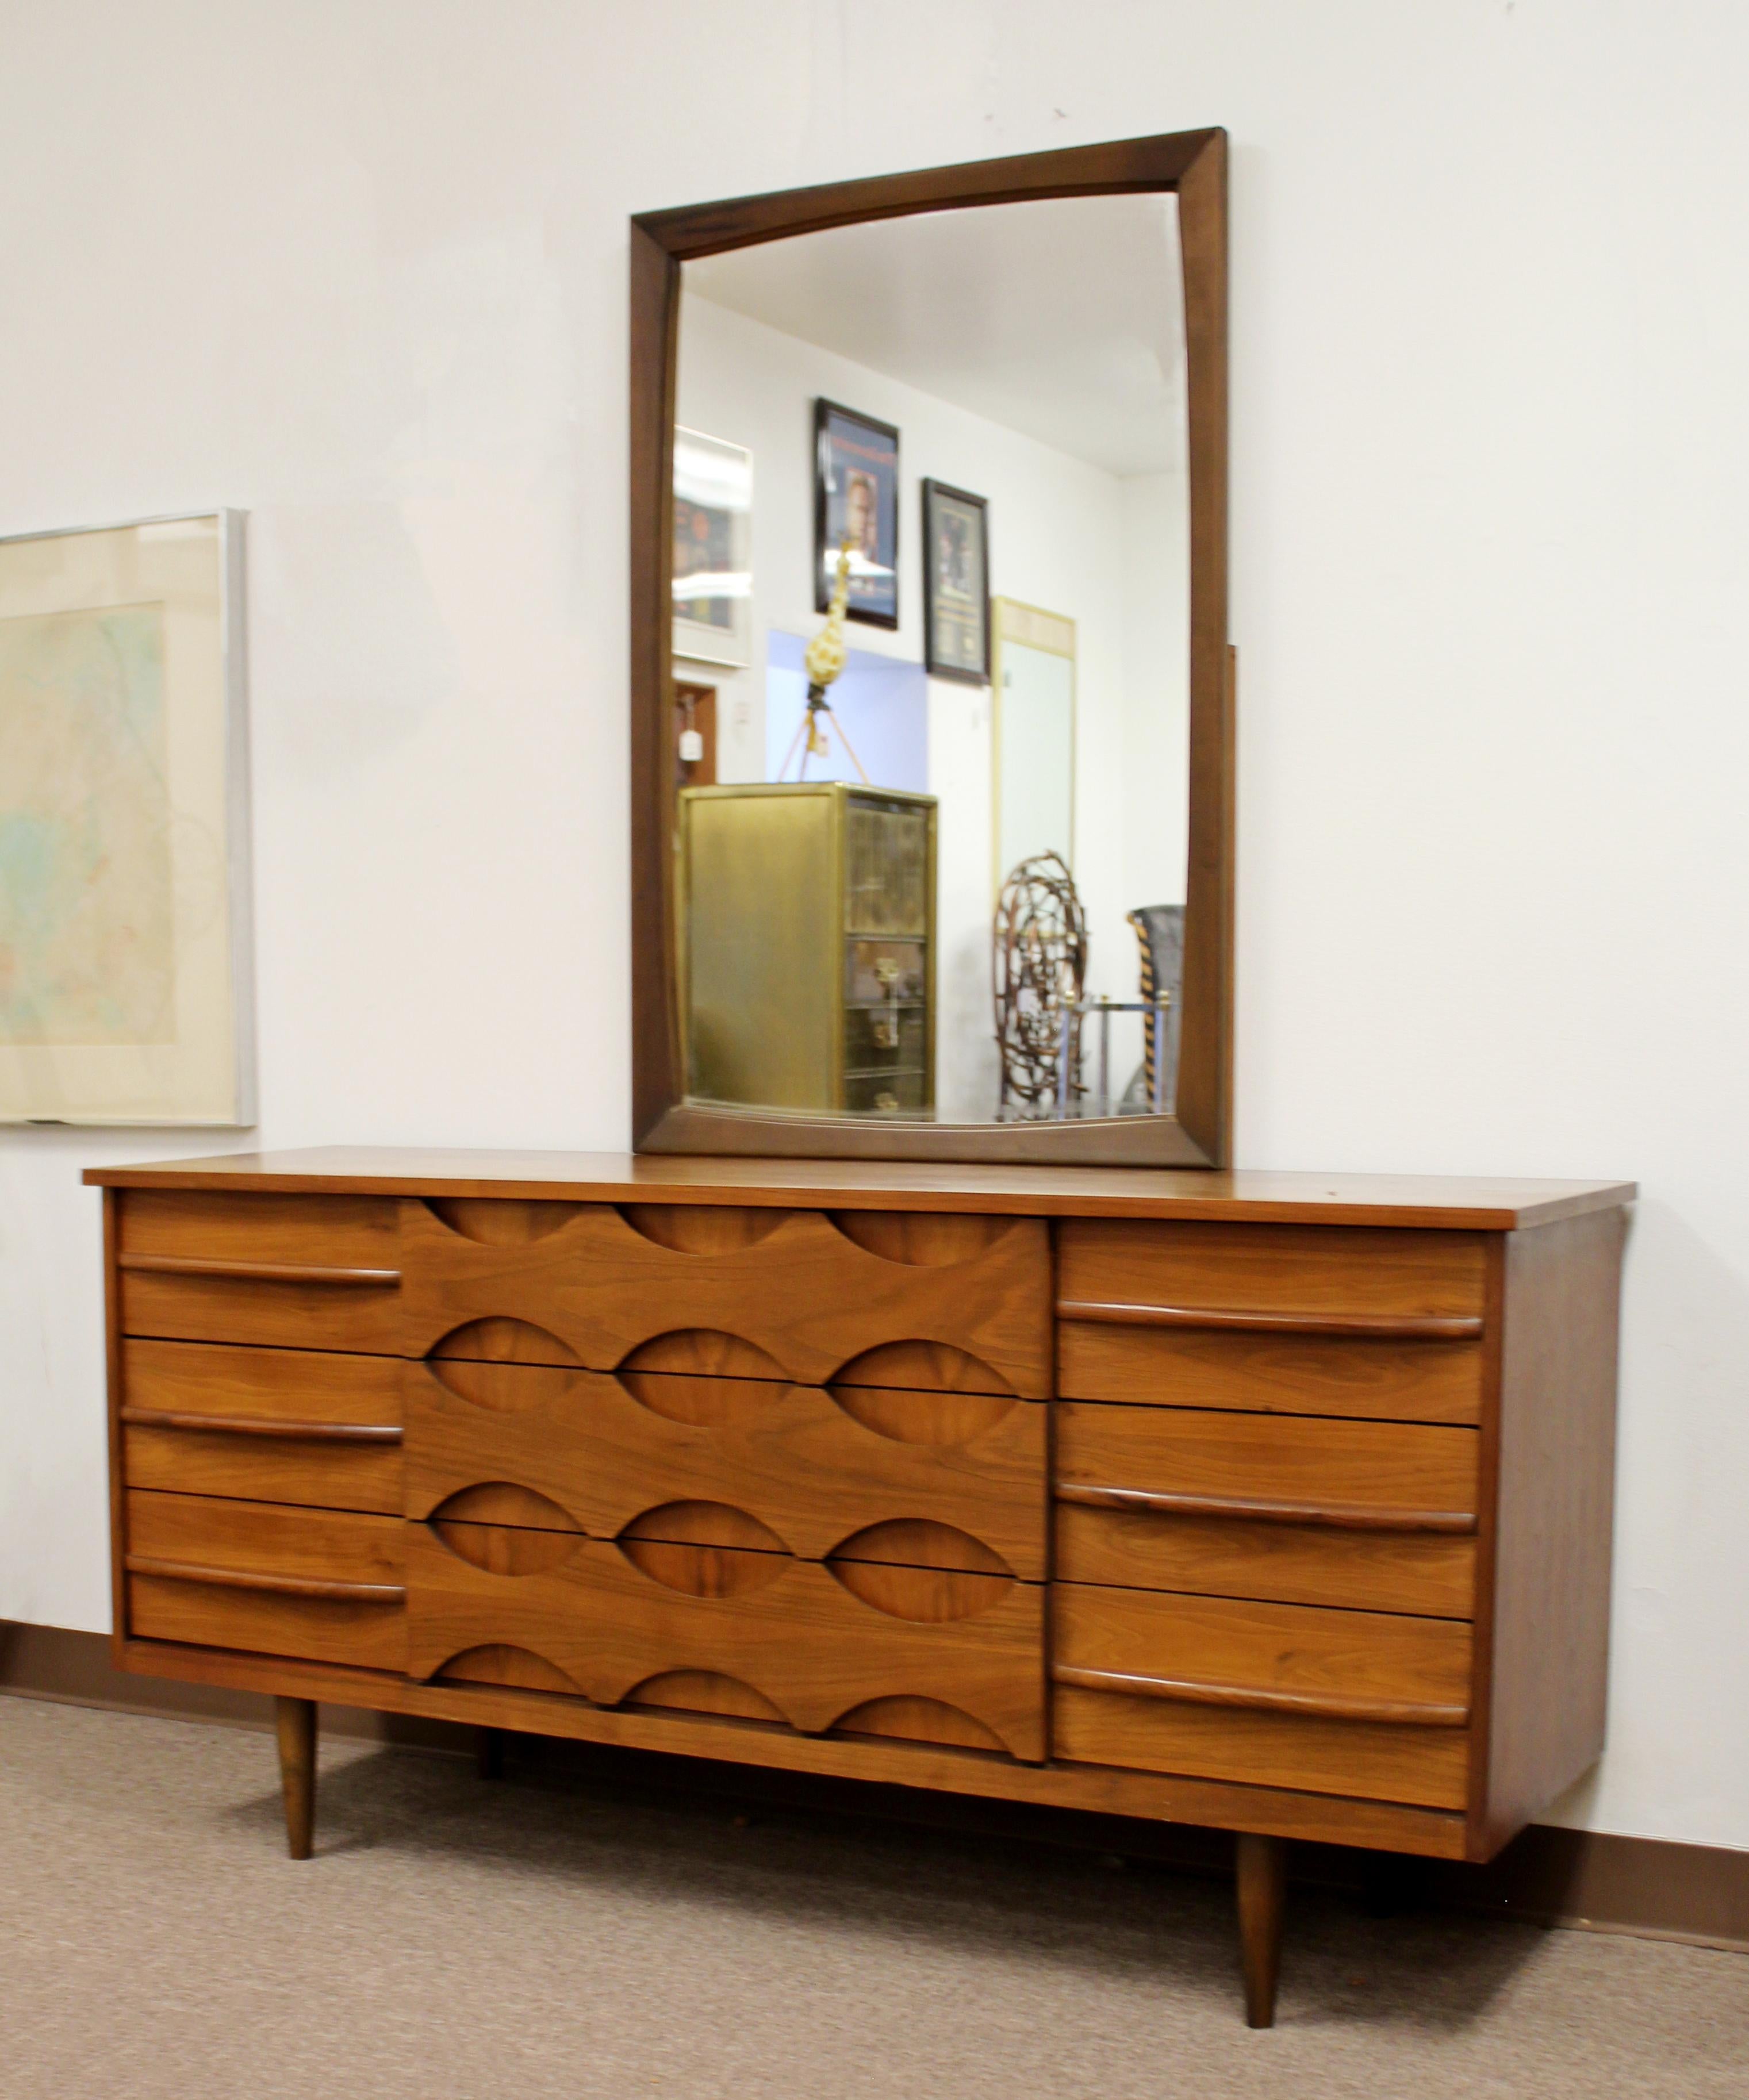 For your consideration is a wonderfully carved, nine drawer, lowboy dresser, with attached mirror, made in Denmark, in the style of Arne Vodder, circa the 1960s. In excellent vintage condition. The dimensions of the dresser are 64